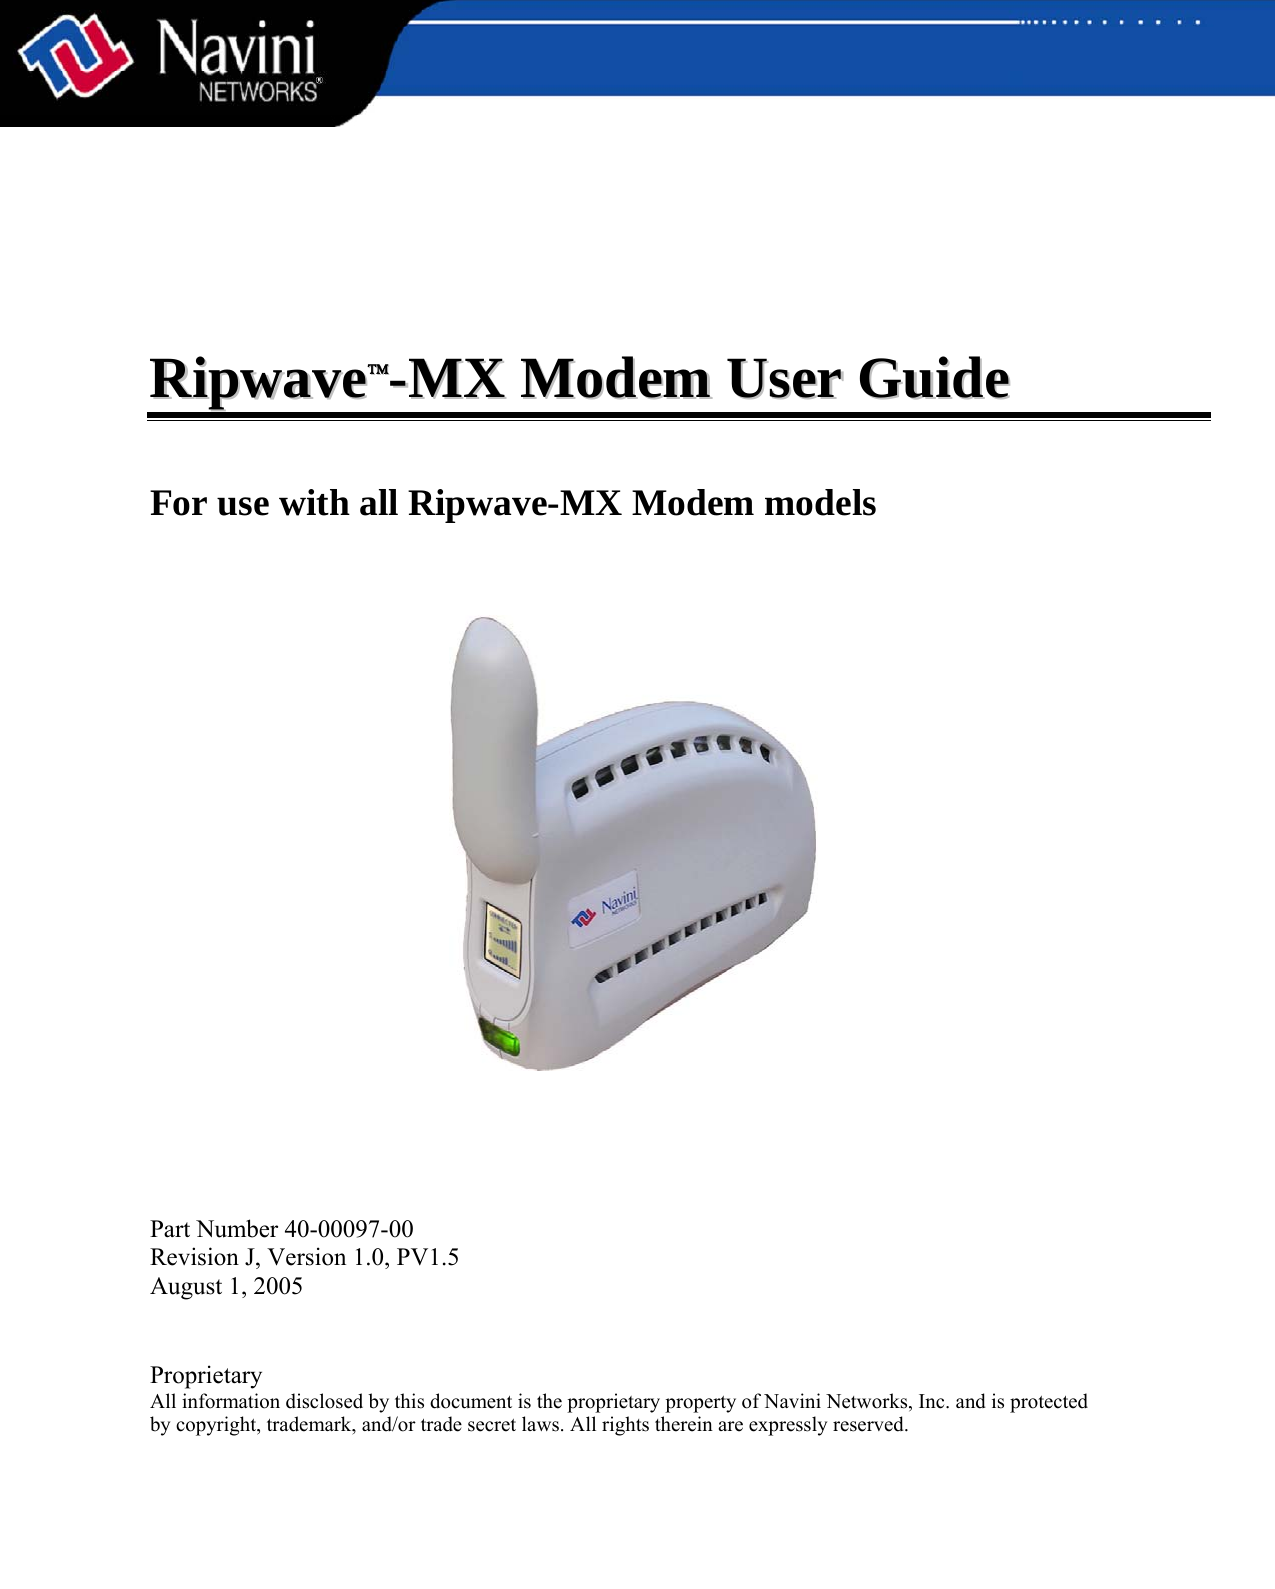           RRiippwwaavvee™™--MMXX  MMooddeemm  UUsseerr  GGuuiiddee    For use with all Ripwave-MX Modem models        Part Number 40-00097-00 Revision J, Version 1.0, PV1.5 August 1, 2005   Proprietary All information disclosed by this document is the proprietary property of Navini Networks, Inc. and is protected  by copyright, trademark, and/or trade secret laws. All rights therein are expressly reserved. 